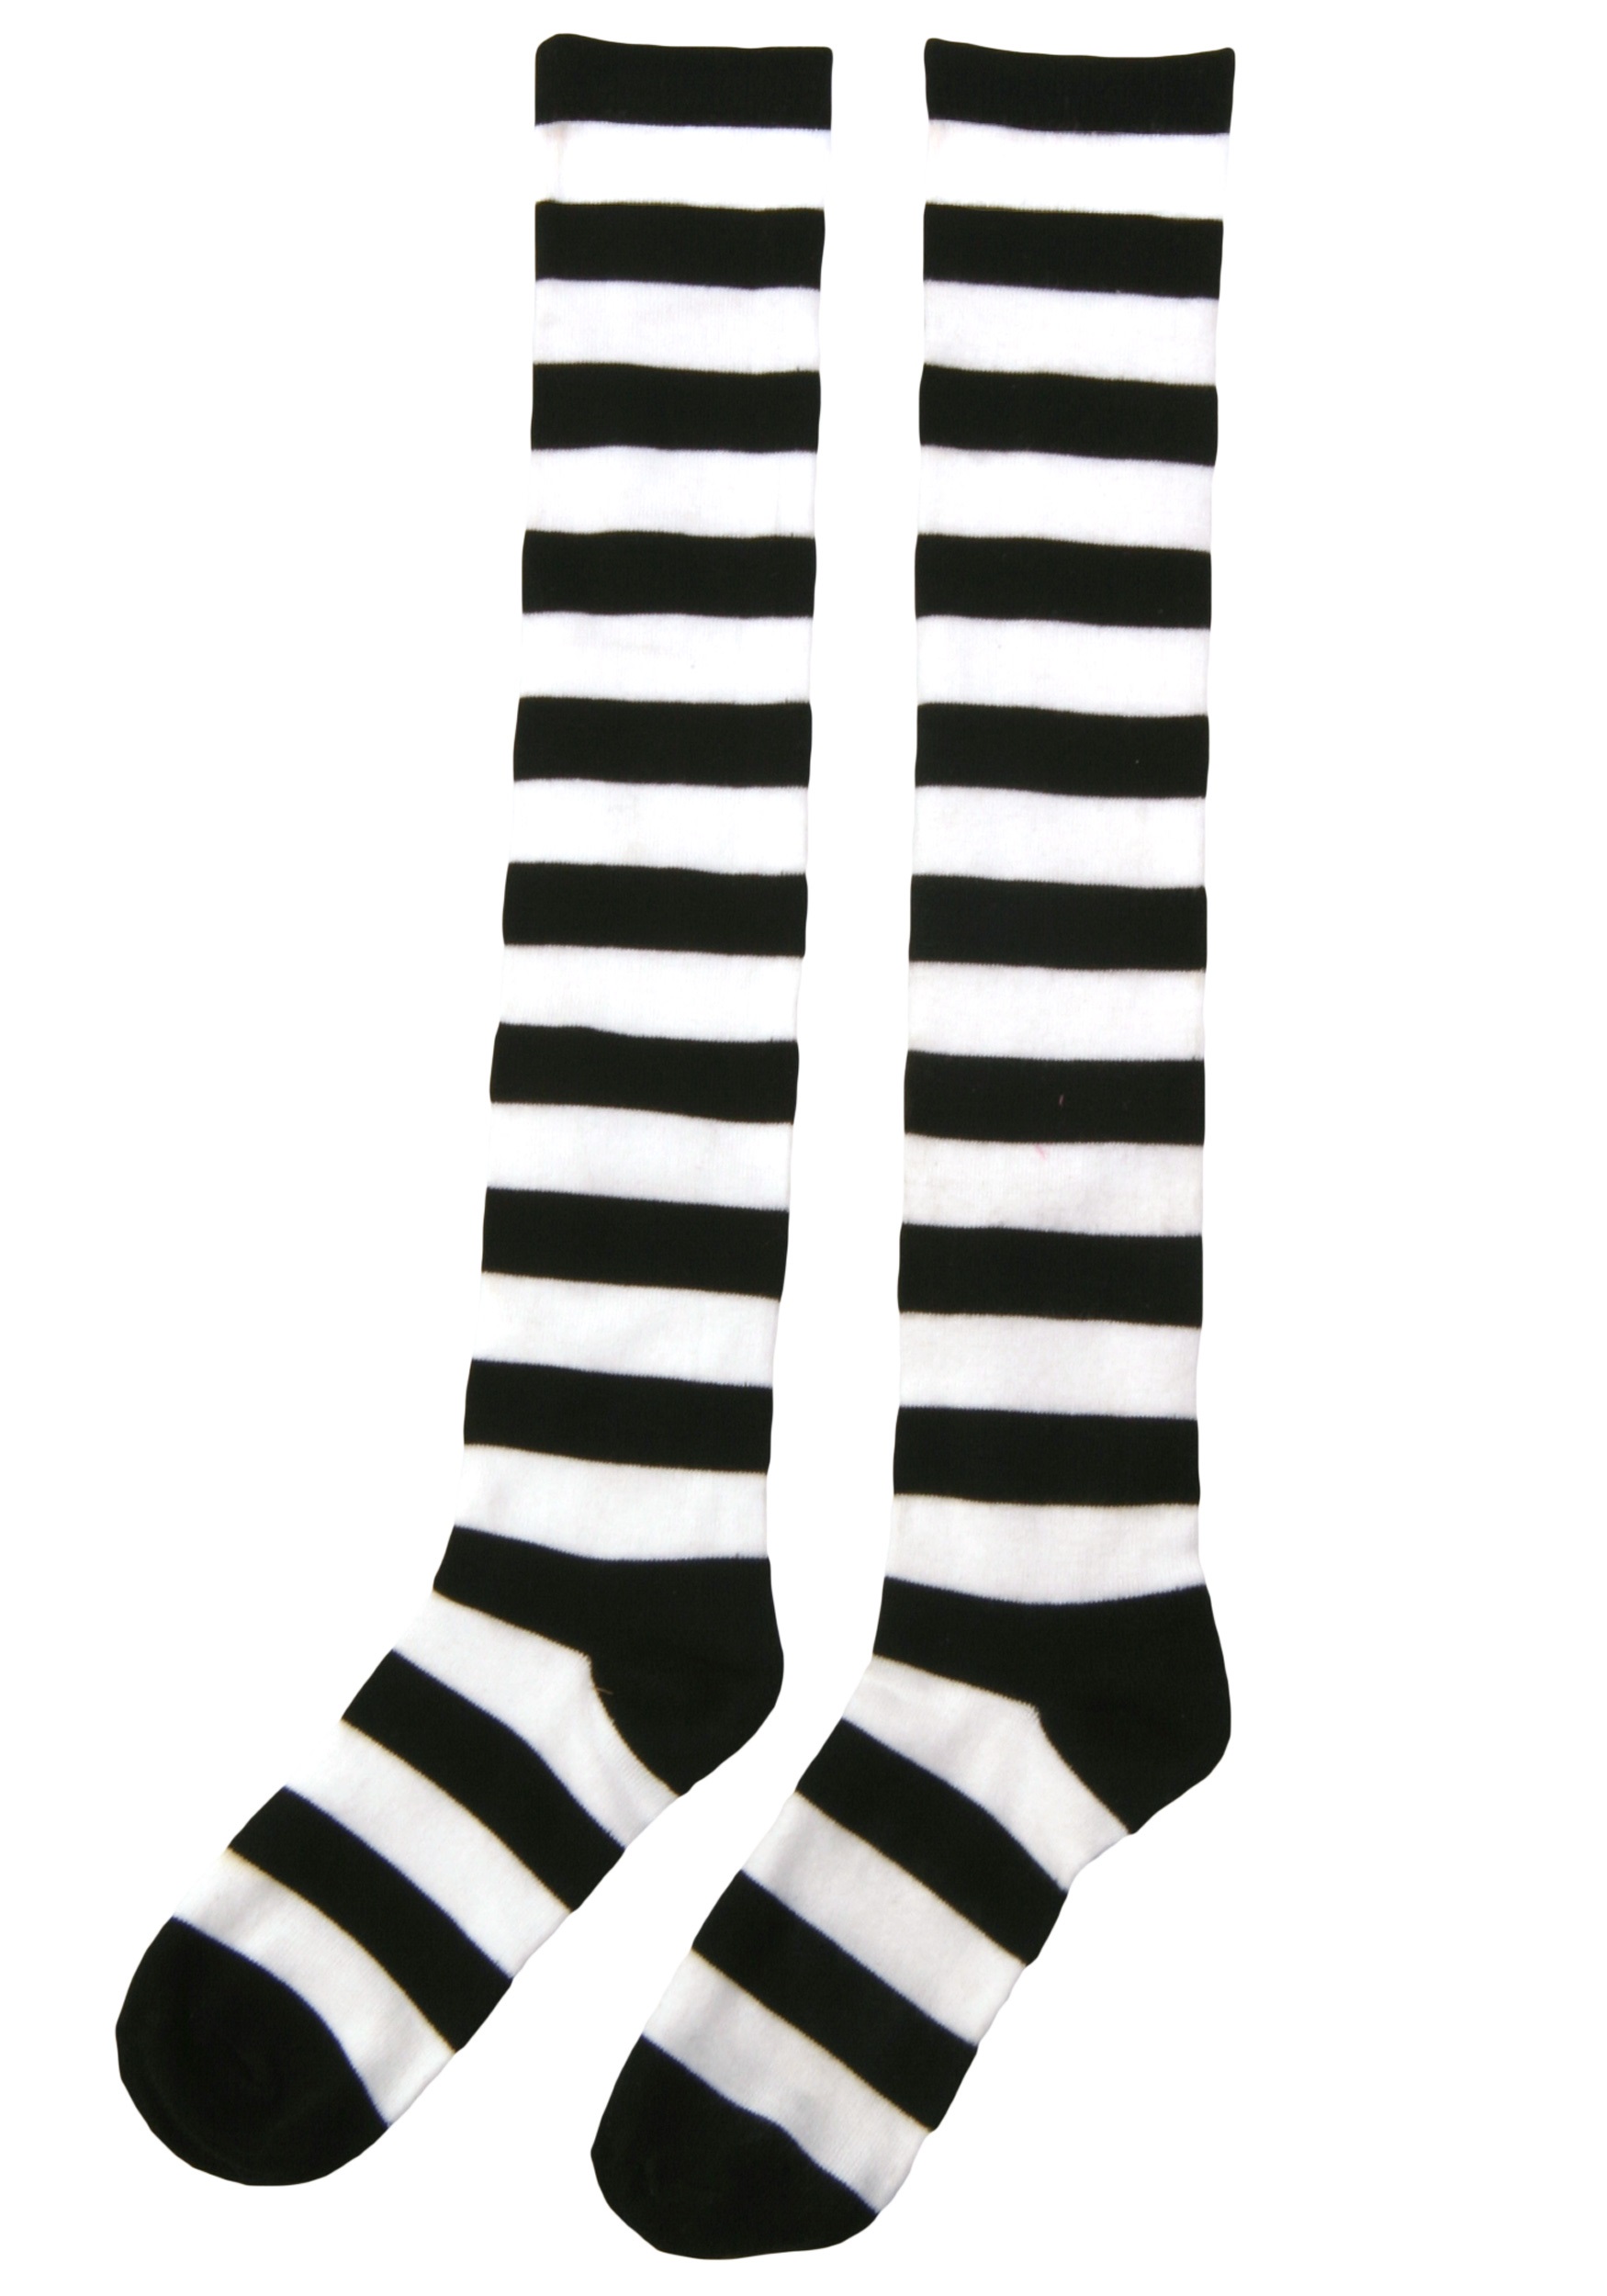 https://images.halloweencostumes.ca/products/5154/1-1/striped-witch-socks.jpg